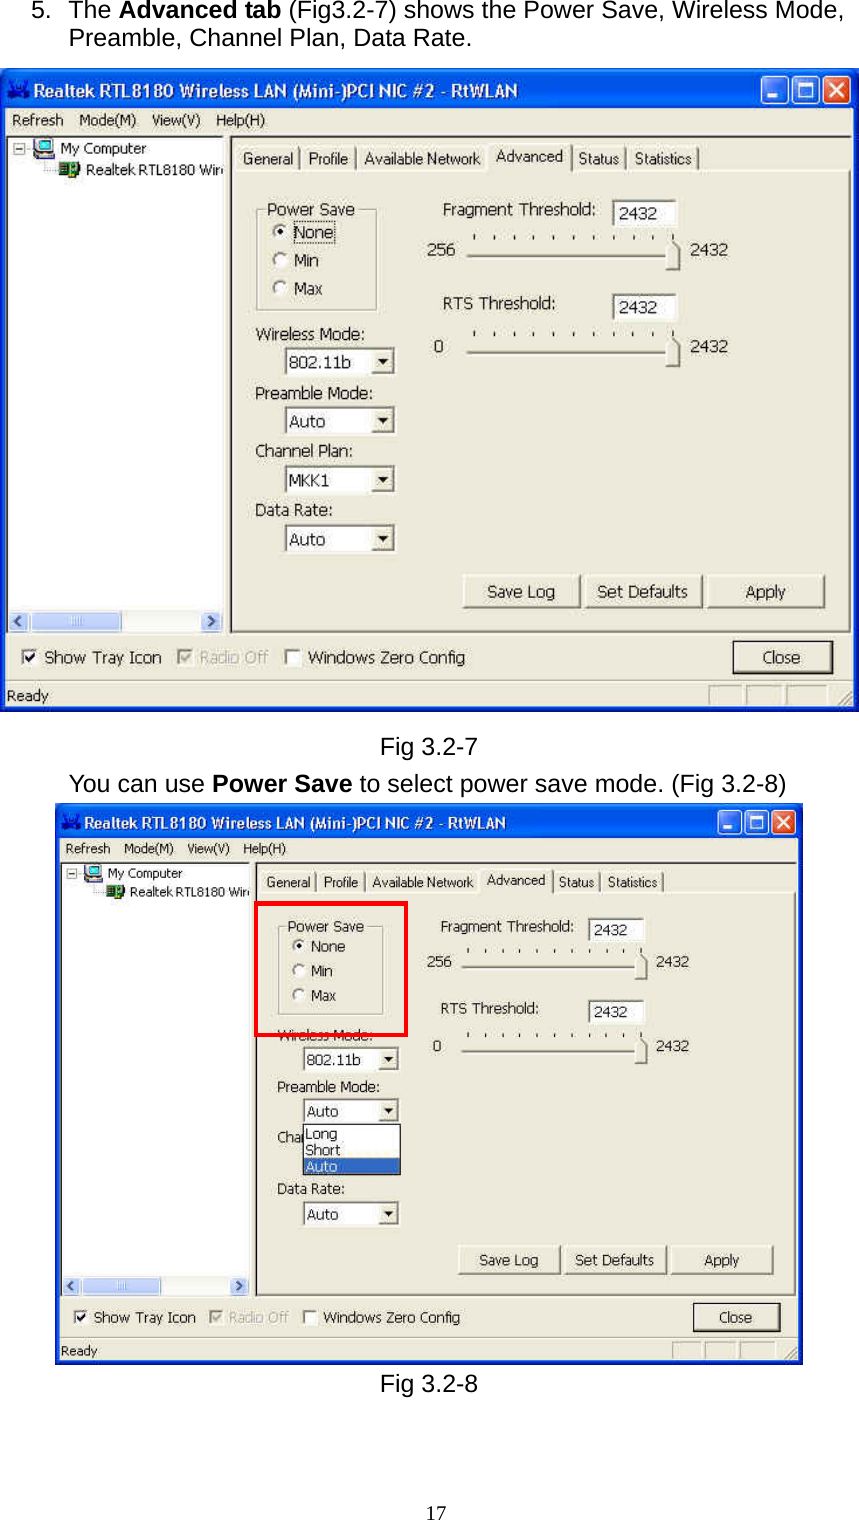   17 5. The Advanced tab (Fig3.2-7) shows the Power Save, Wireless Mode, Preamble, Channel Plan, Data Rate.   Fig 3.2-7 You can use Power Save to select power save mode. (Fig 3.2-8)  Fig 3.2-8  